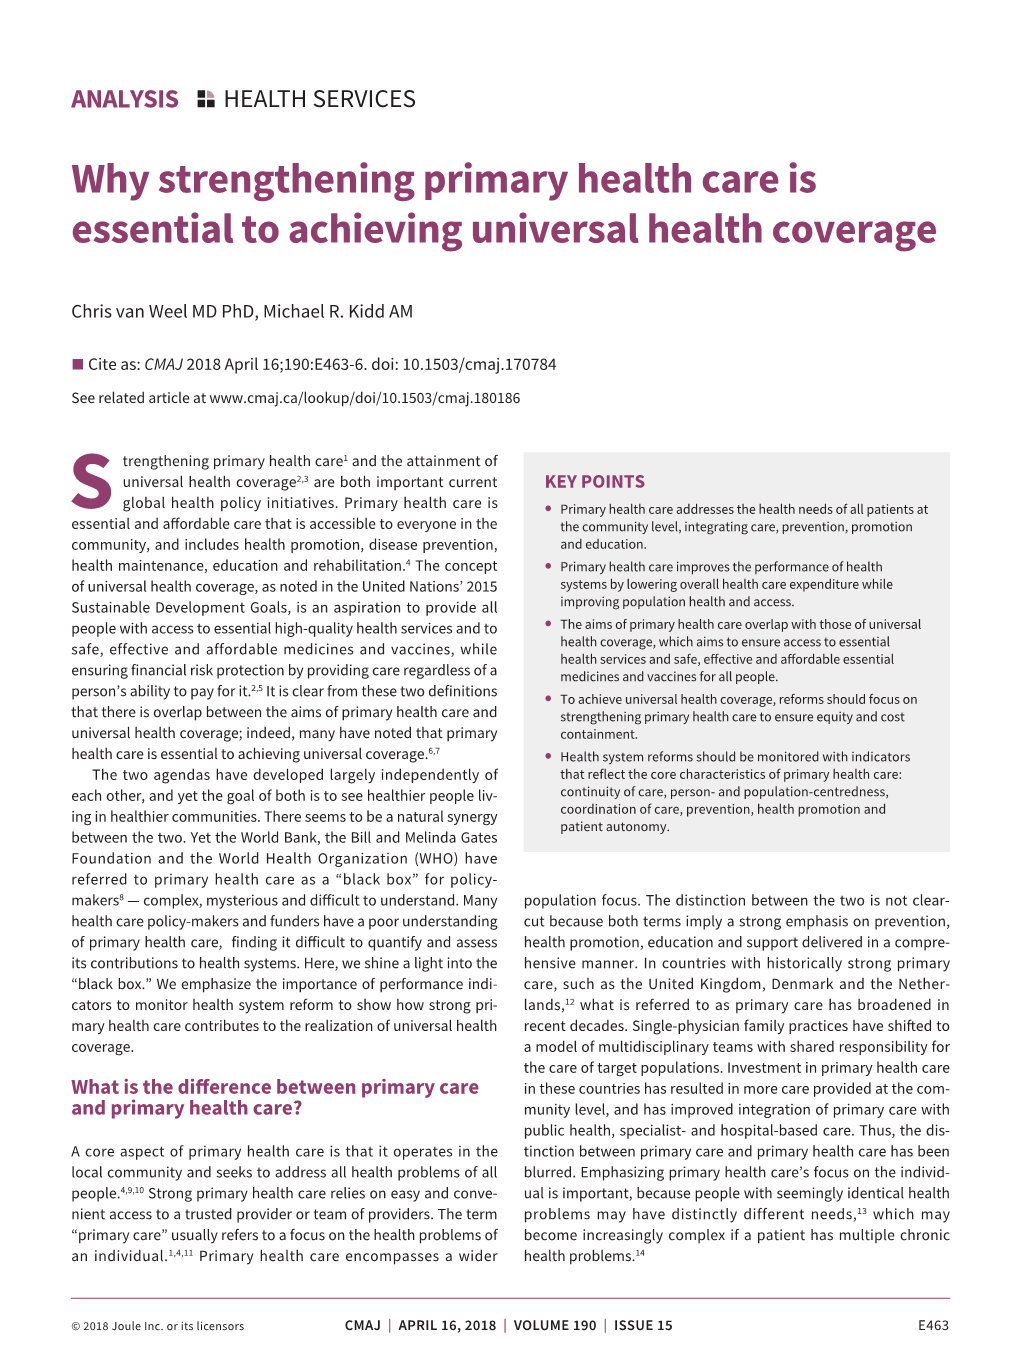 Why Strengthening Primary Health Care Is Essential to Achieving Universal Health Coverage